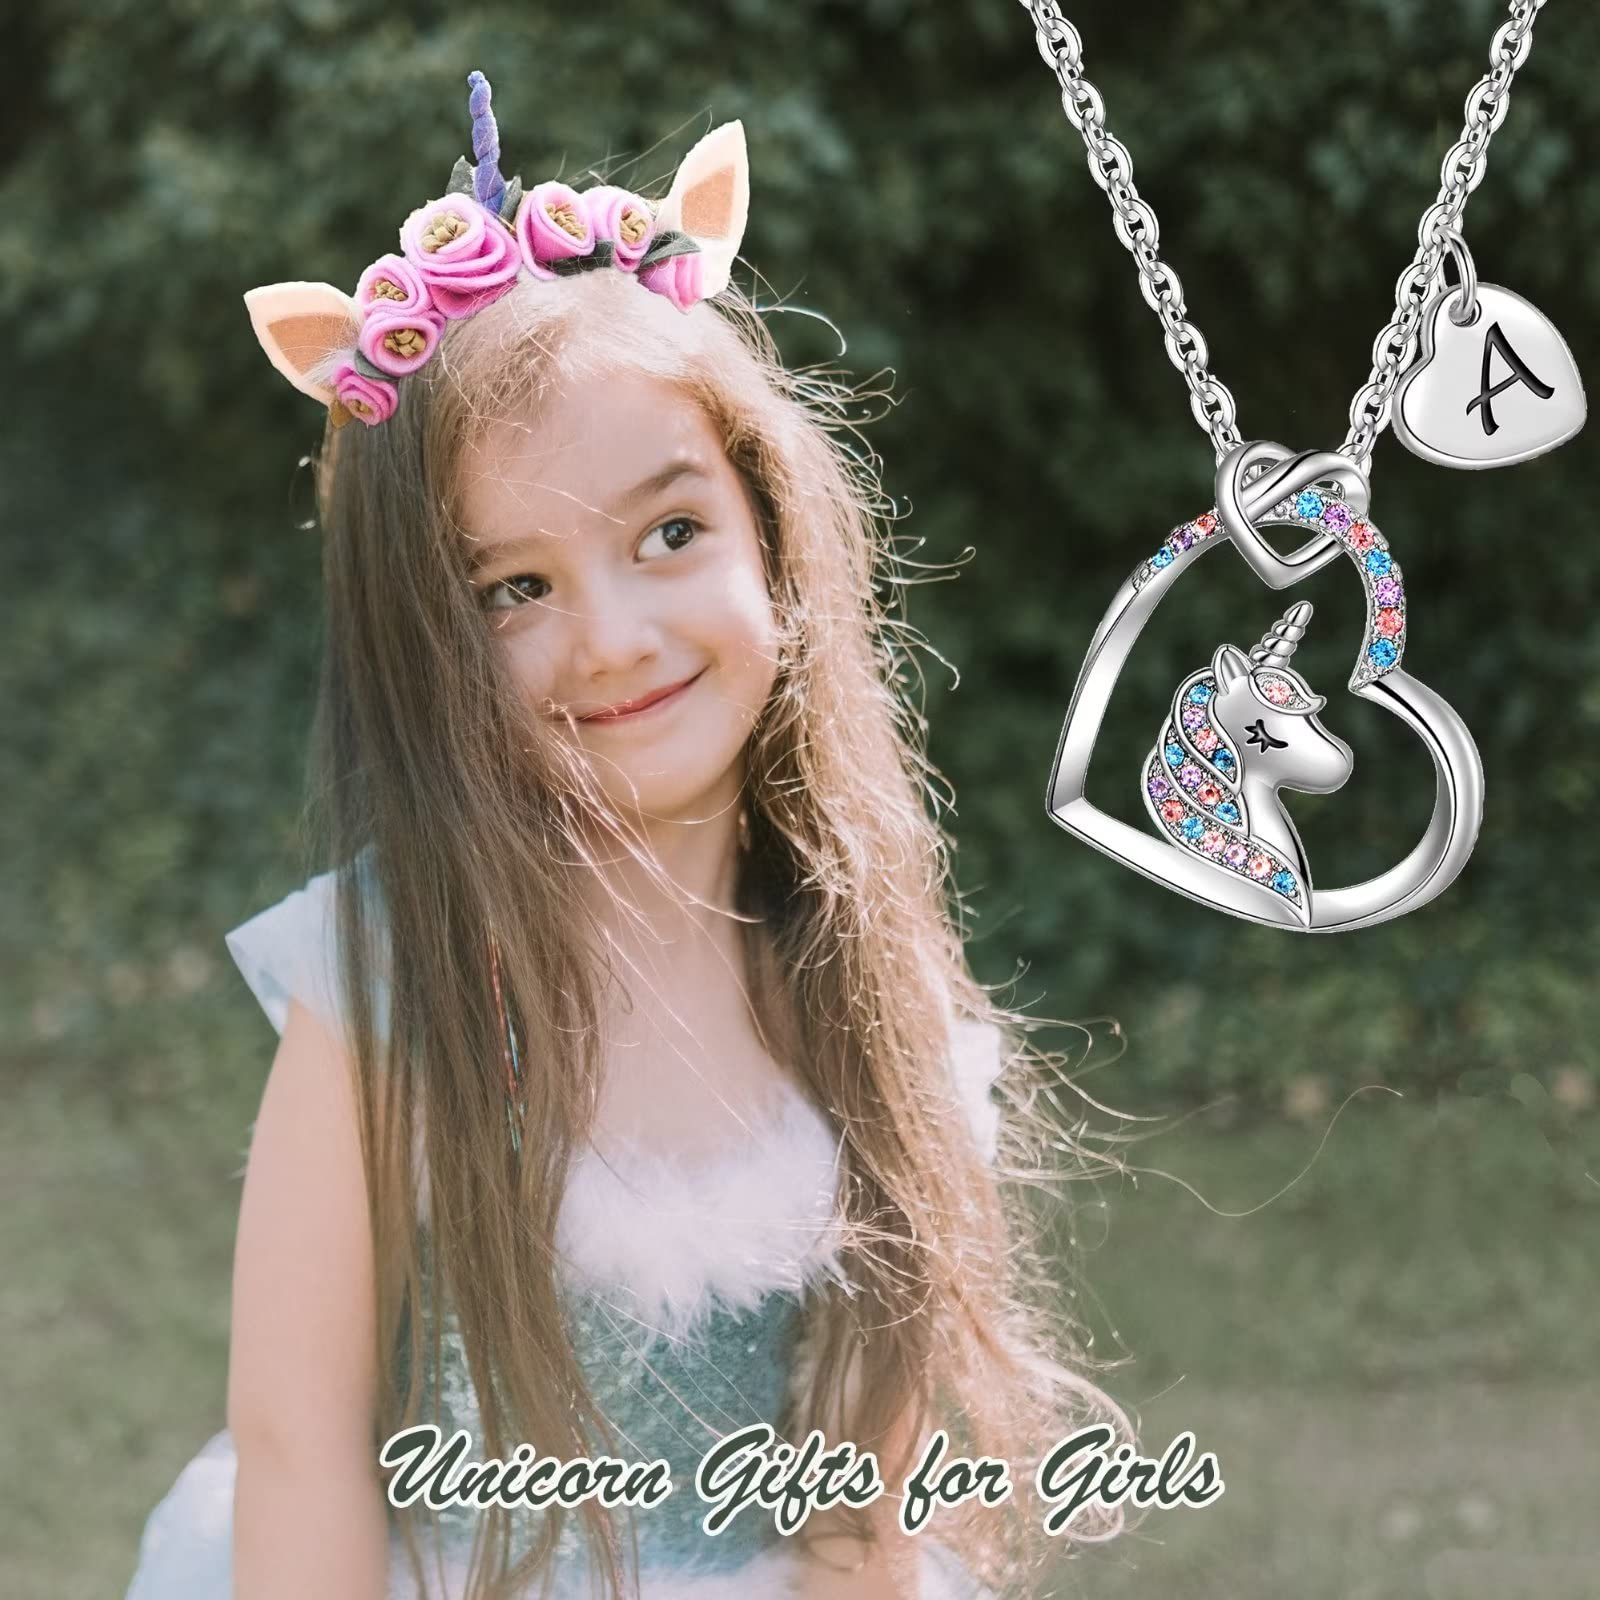 Unicorns Gifts for Girls Necklace, 14K Gold/White Gold/Rose Gold Plated Colorful CZ Heart Pendant Unicorn Necklace for Girls Women Initial Letter Unicorn Necklaces Unicorns Gifts for Girls Jewelry